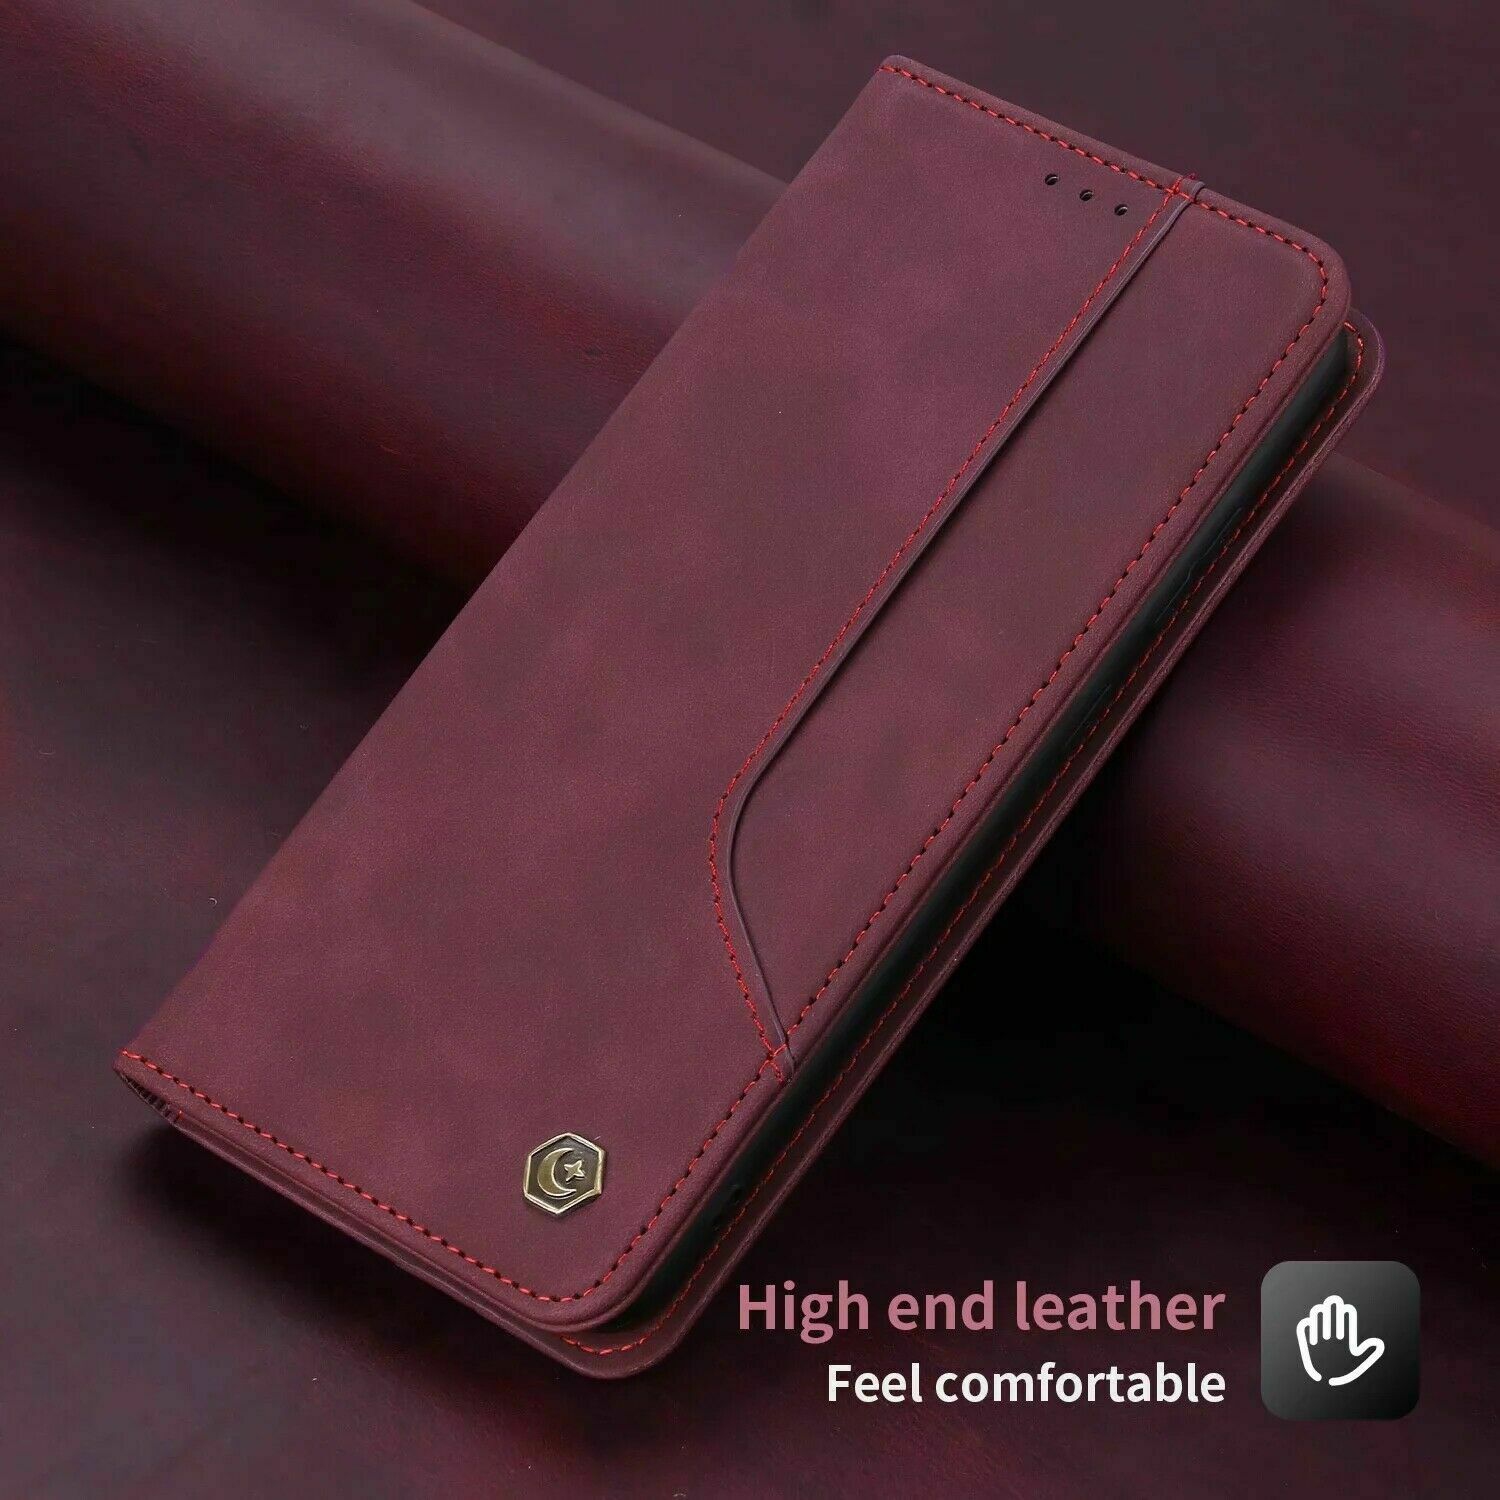 POLA Retro Classic Magnetic PU Leather Flip Wallet Card Holder Phone Case Cover for Samsung Galaxy S22 Plus (Wine Red) - Free Shipping